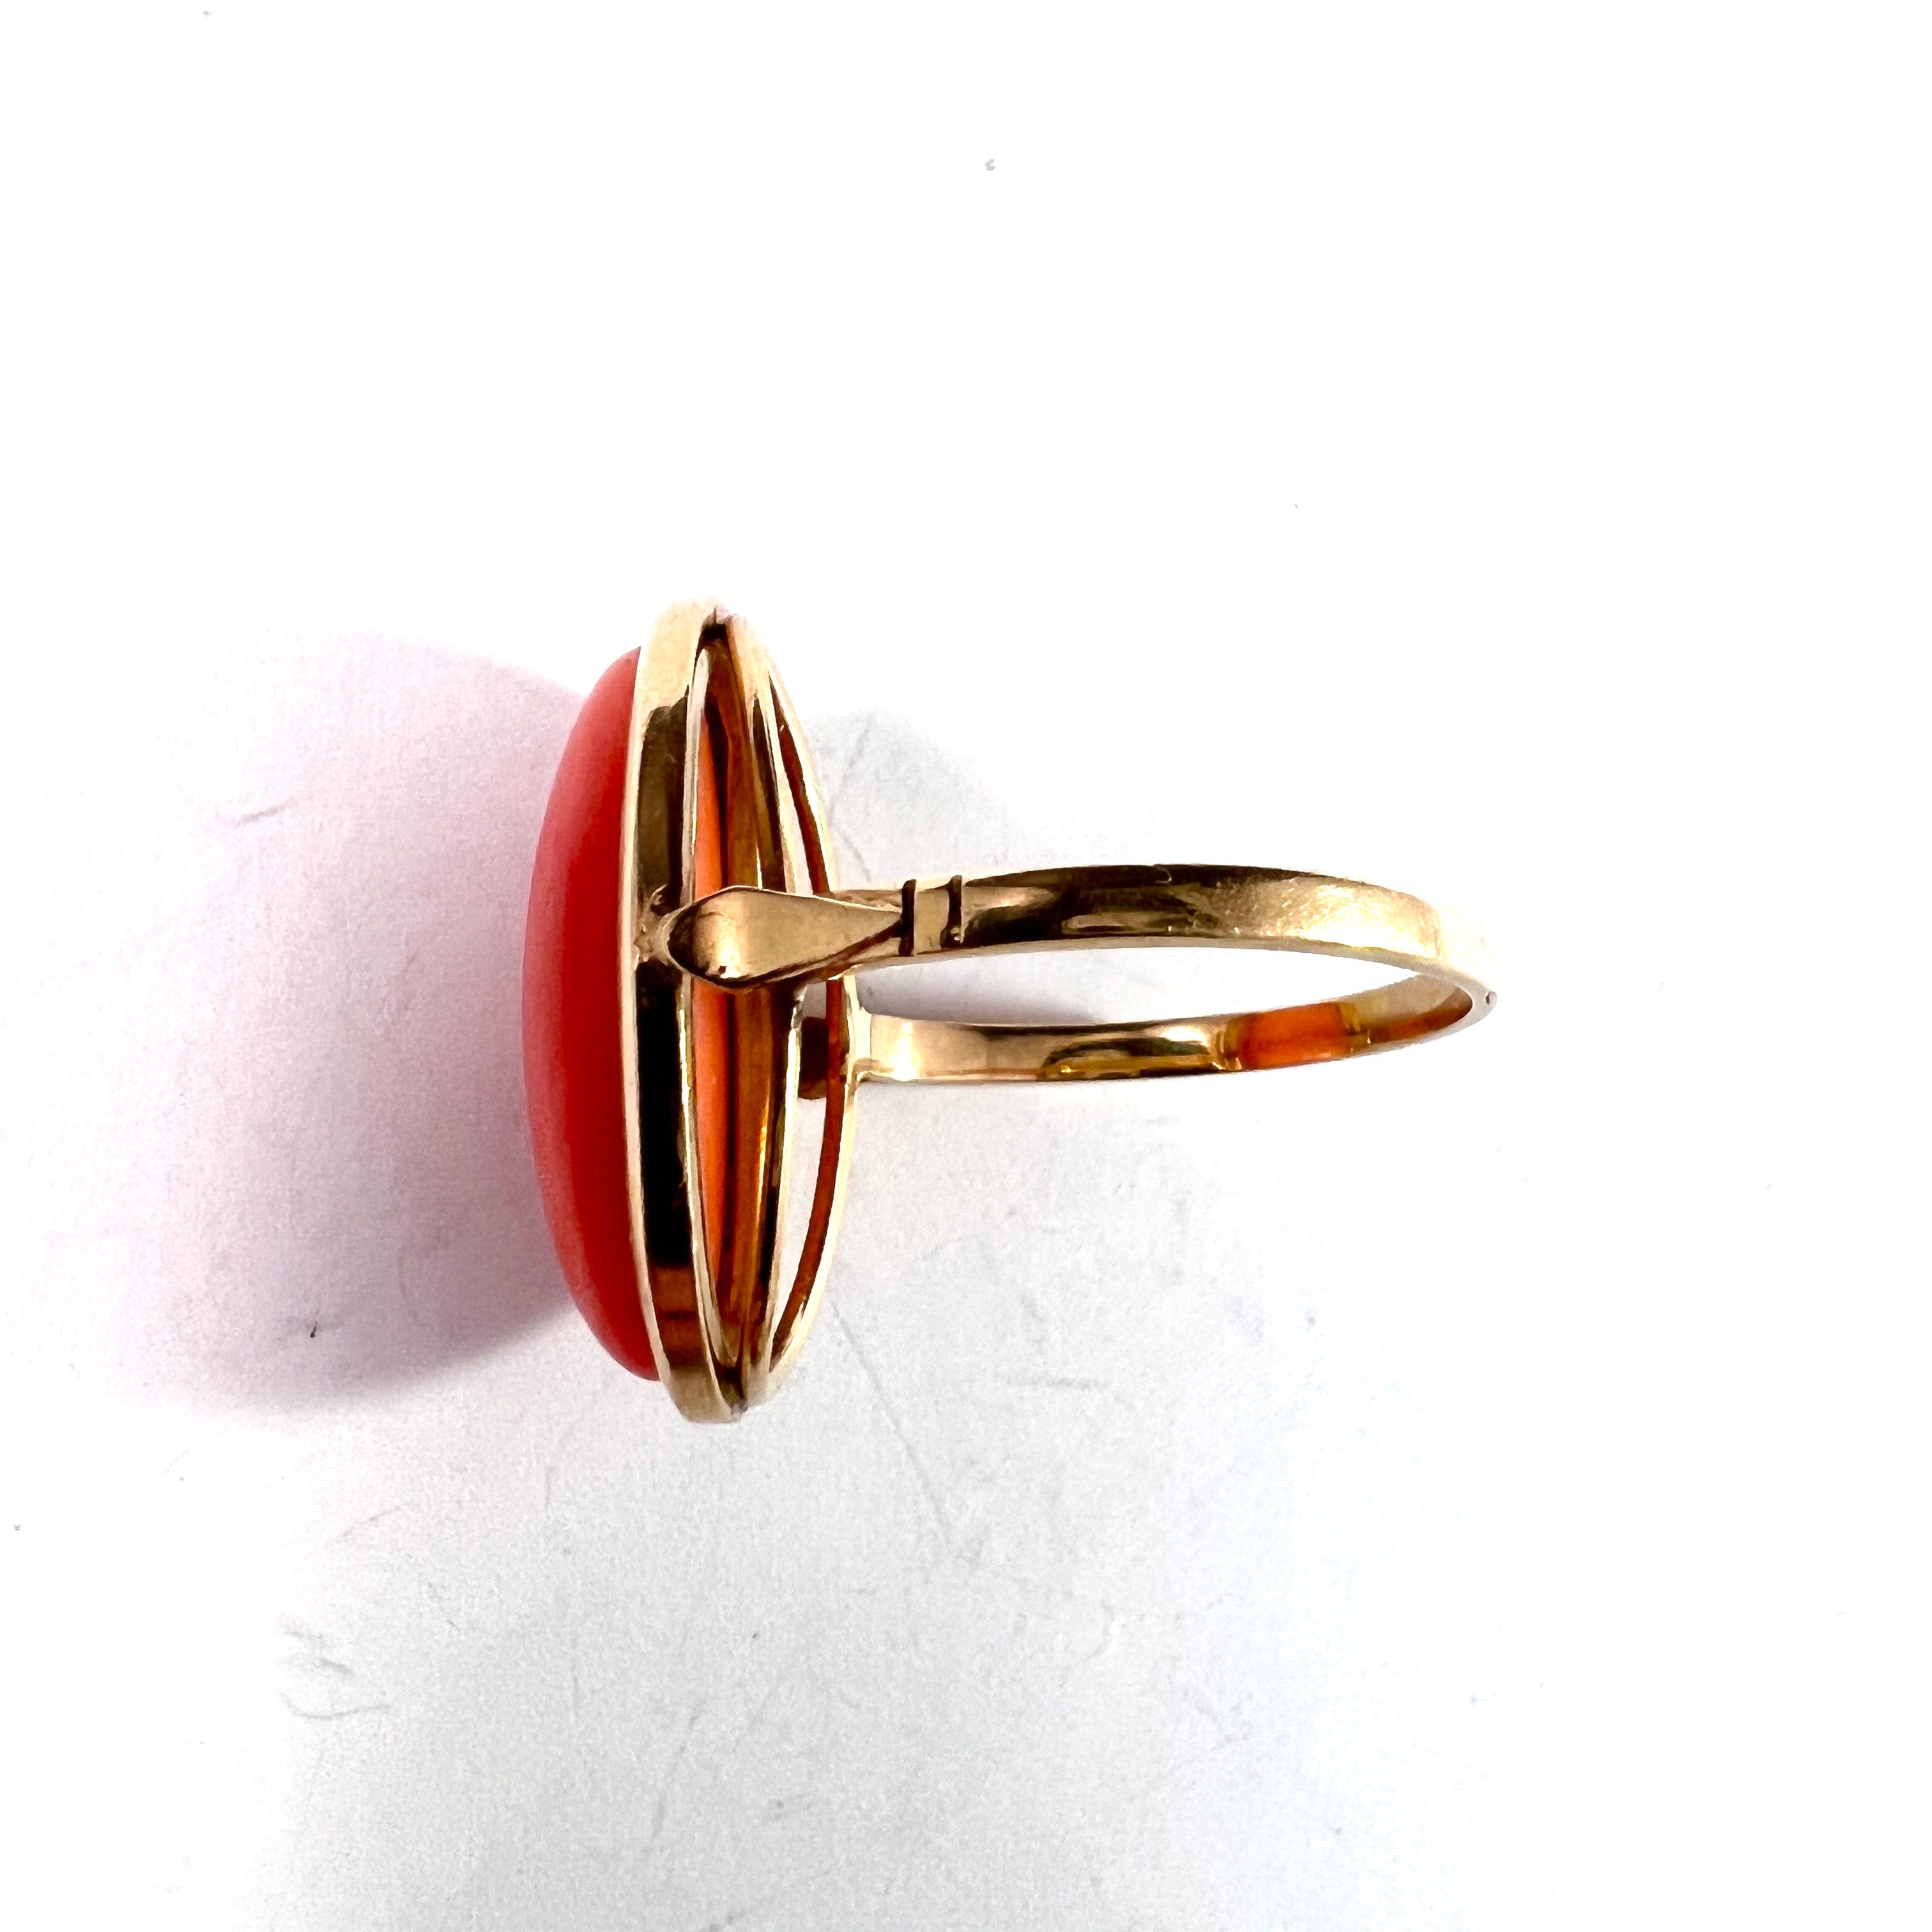 Italy 1950-60s, Vintage 18k Gold Coral Ring.